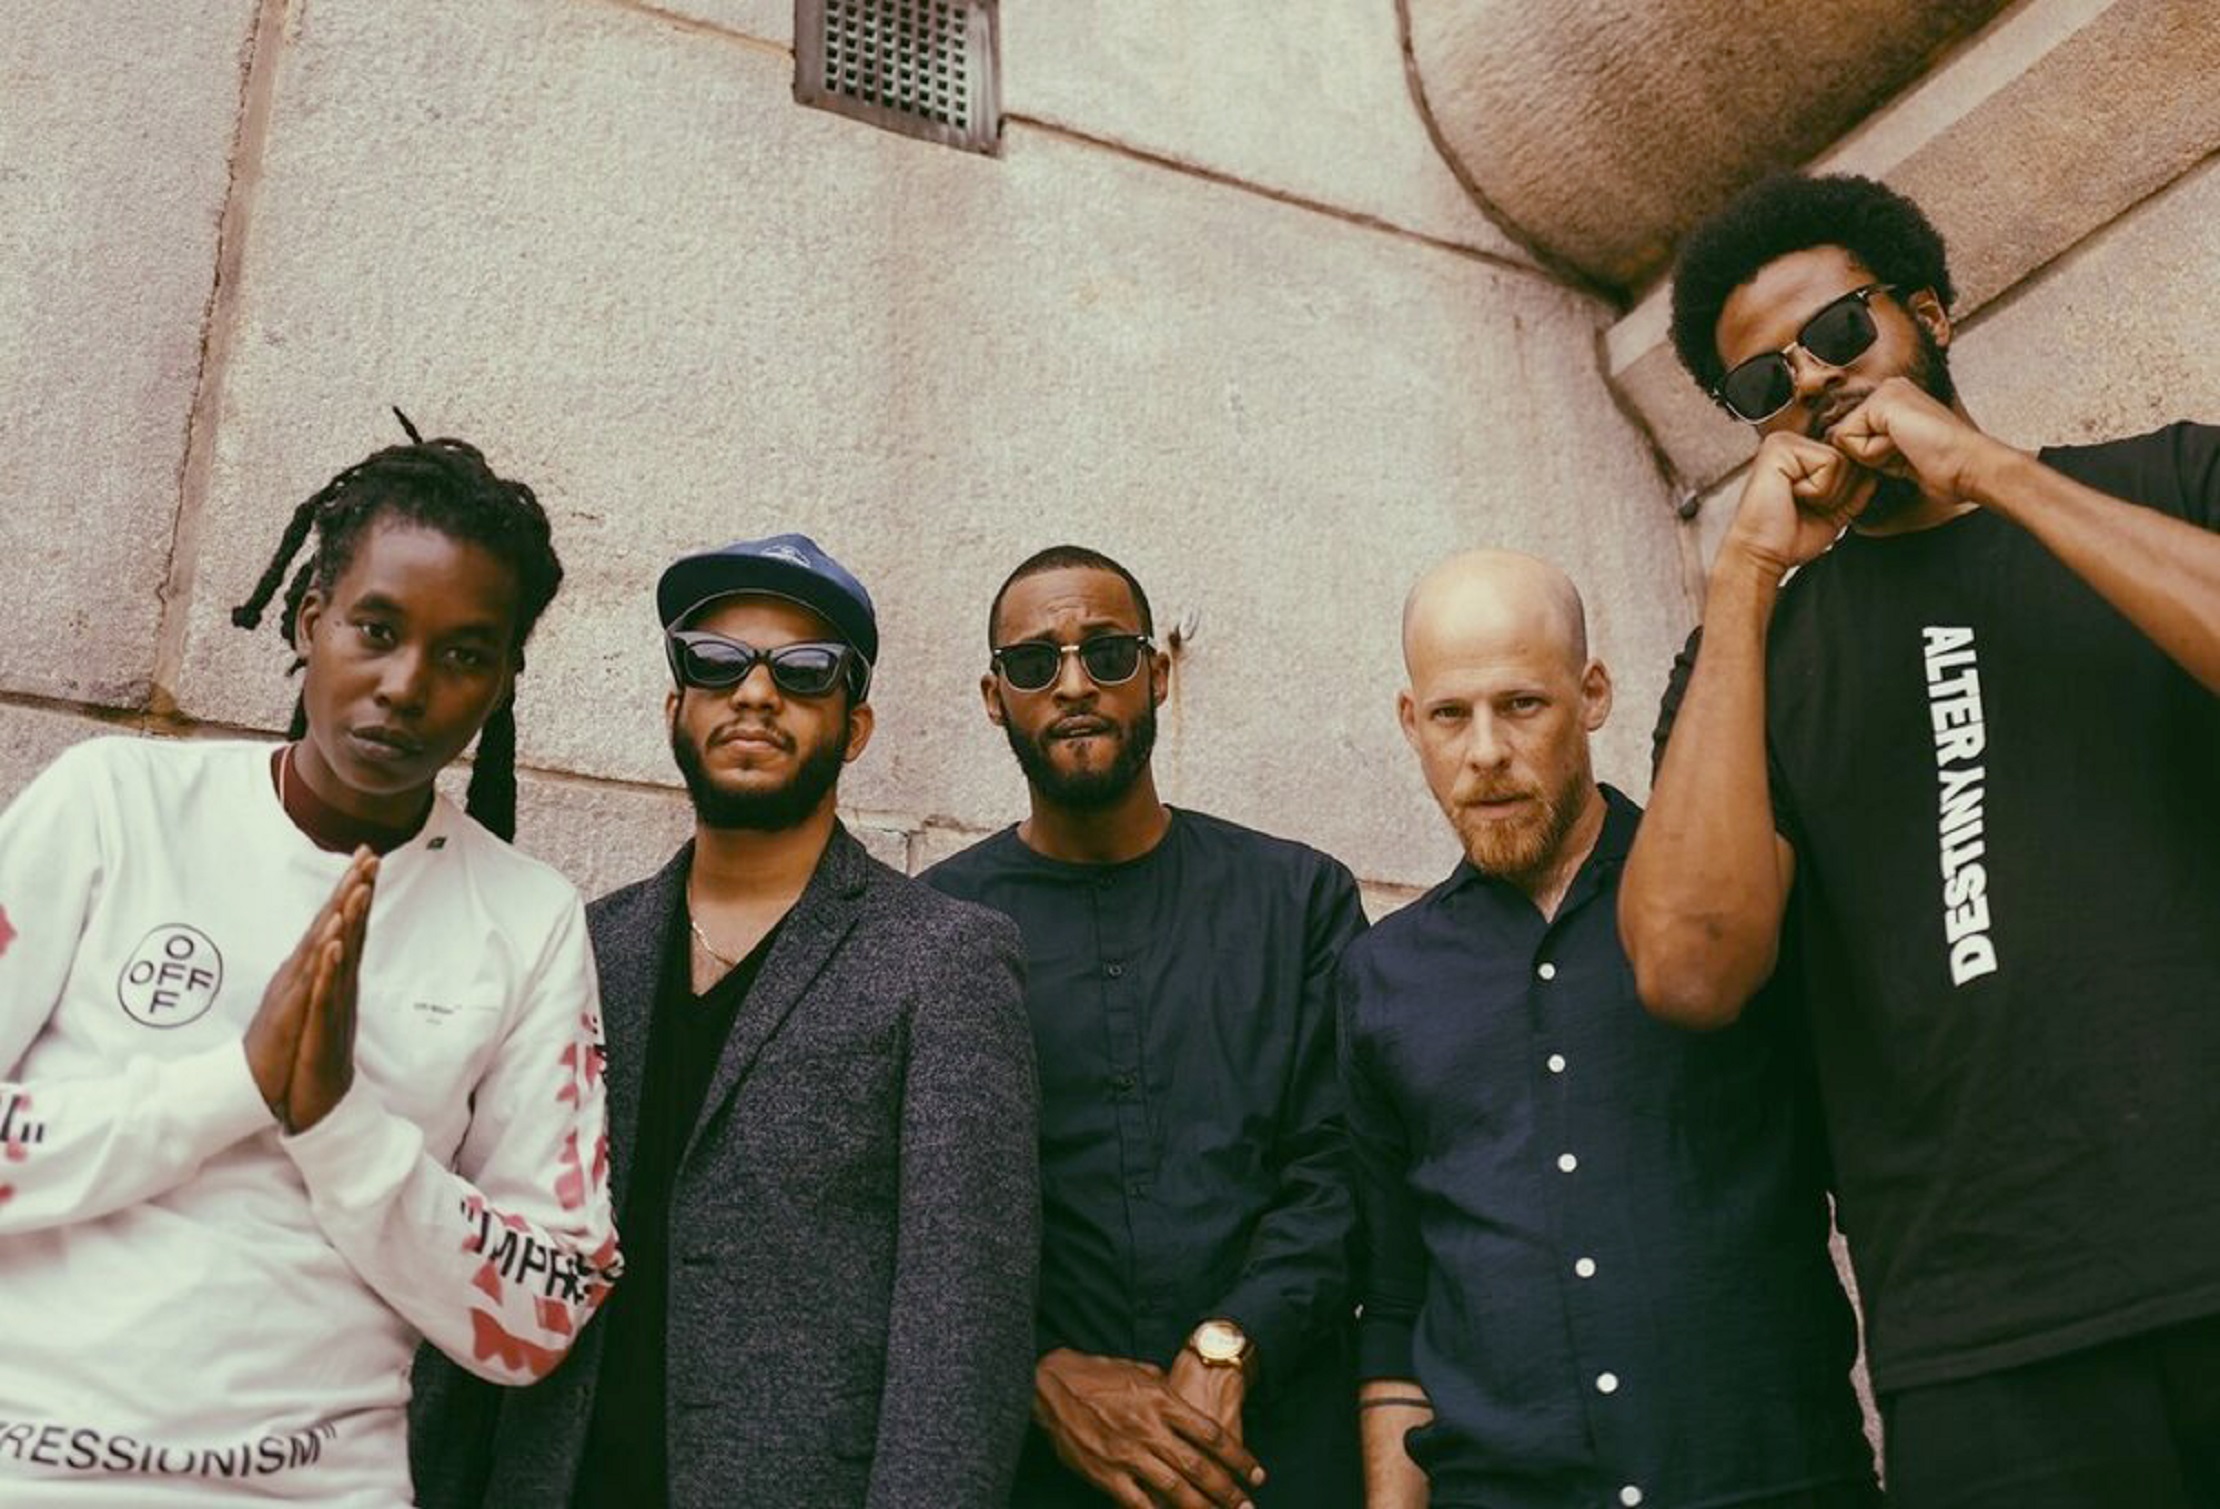 Irreversible Entanglements on June 11 at National Sawdust